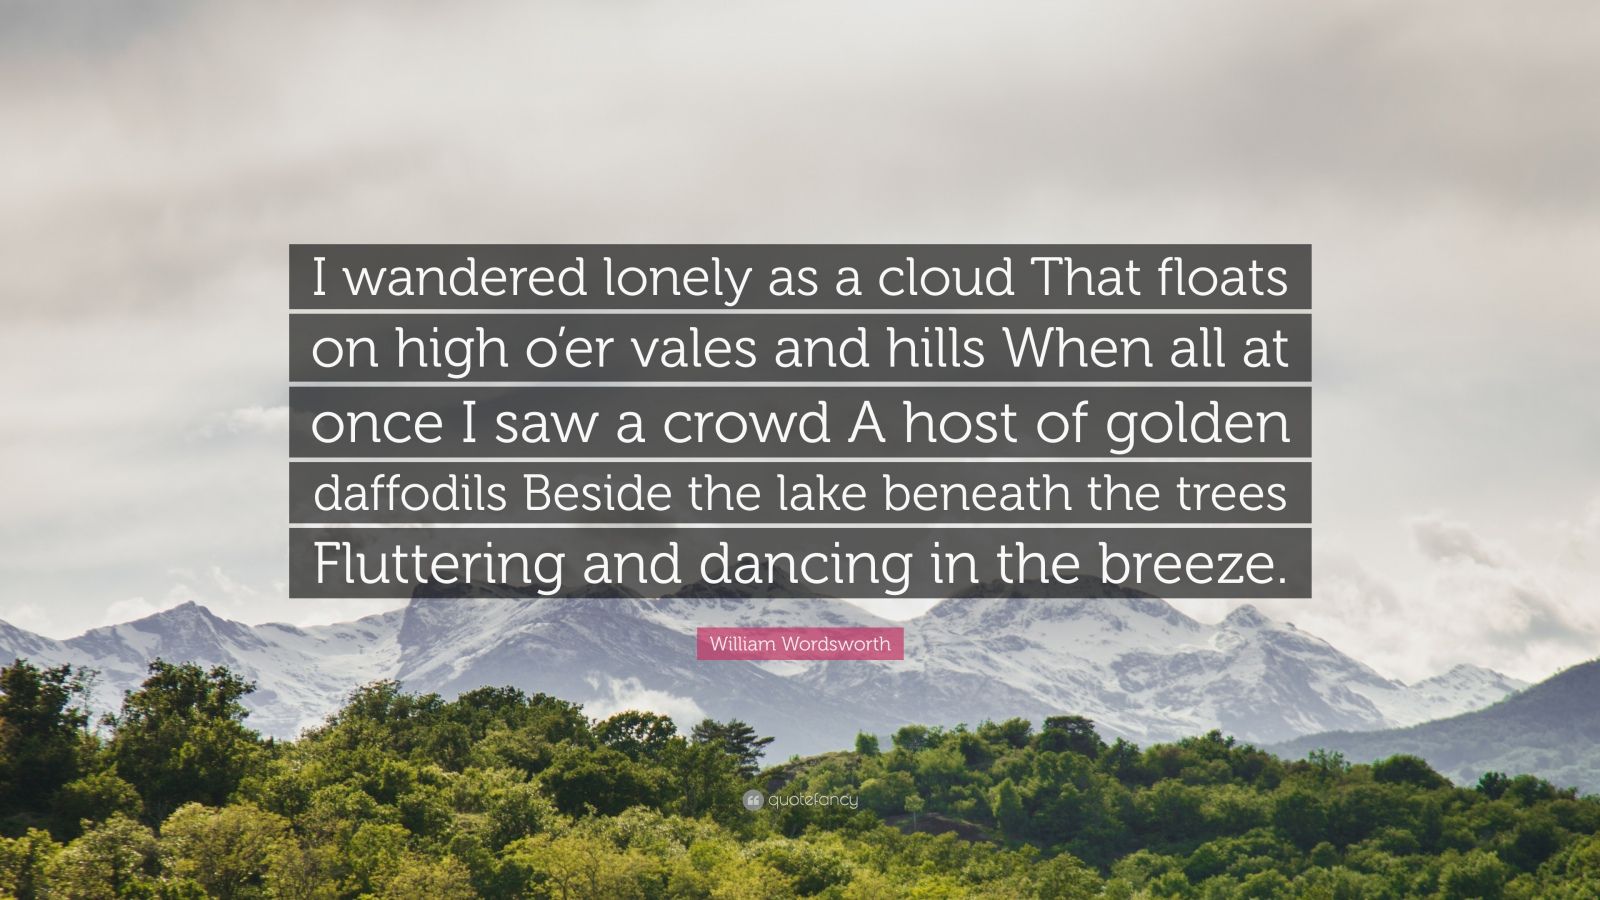 i wonder lonely as a cloud by william wordsworth